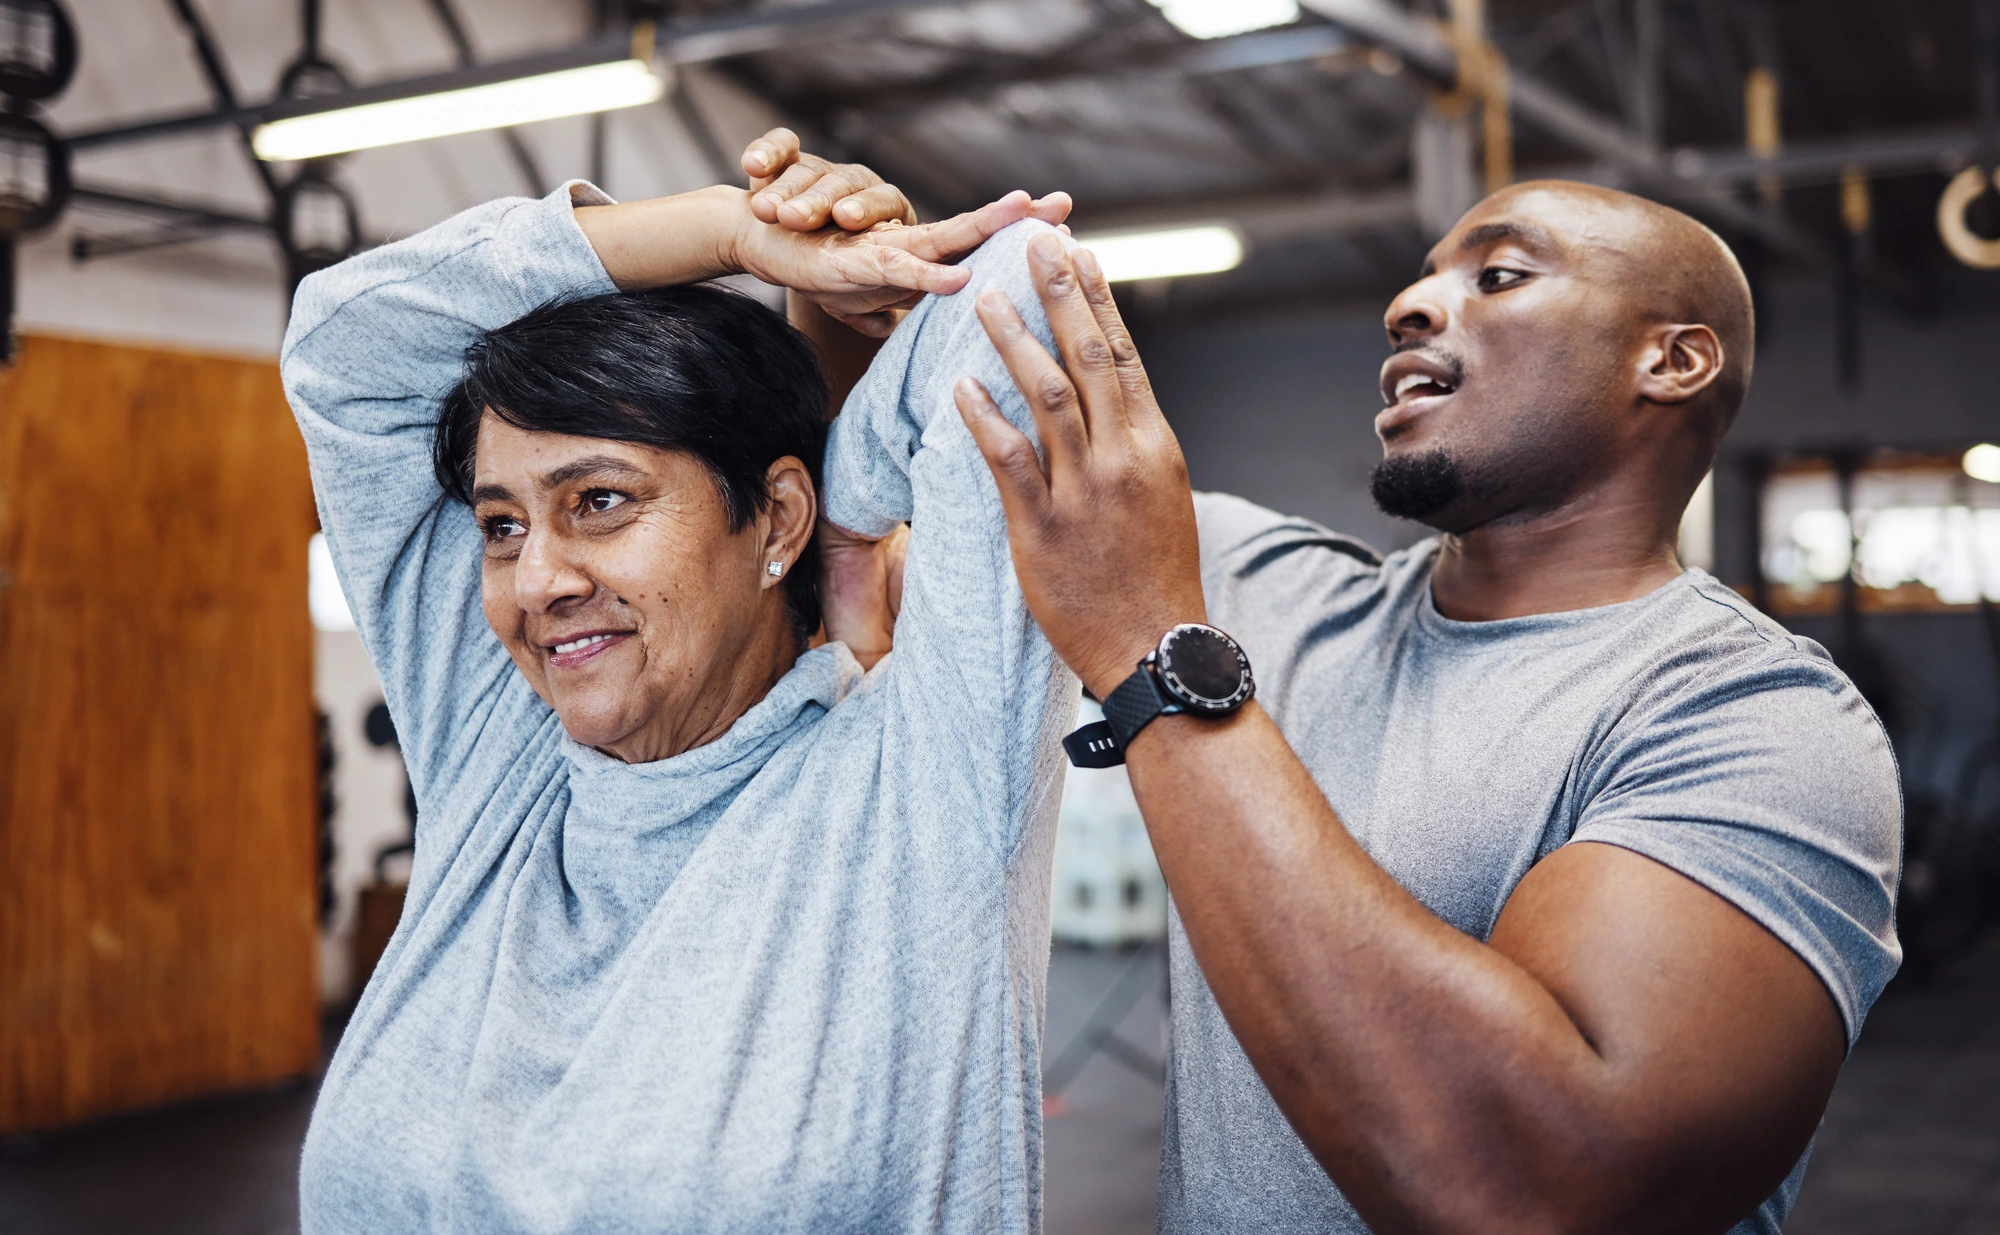 male assisting female stretching at a gym setting.